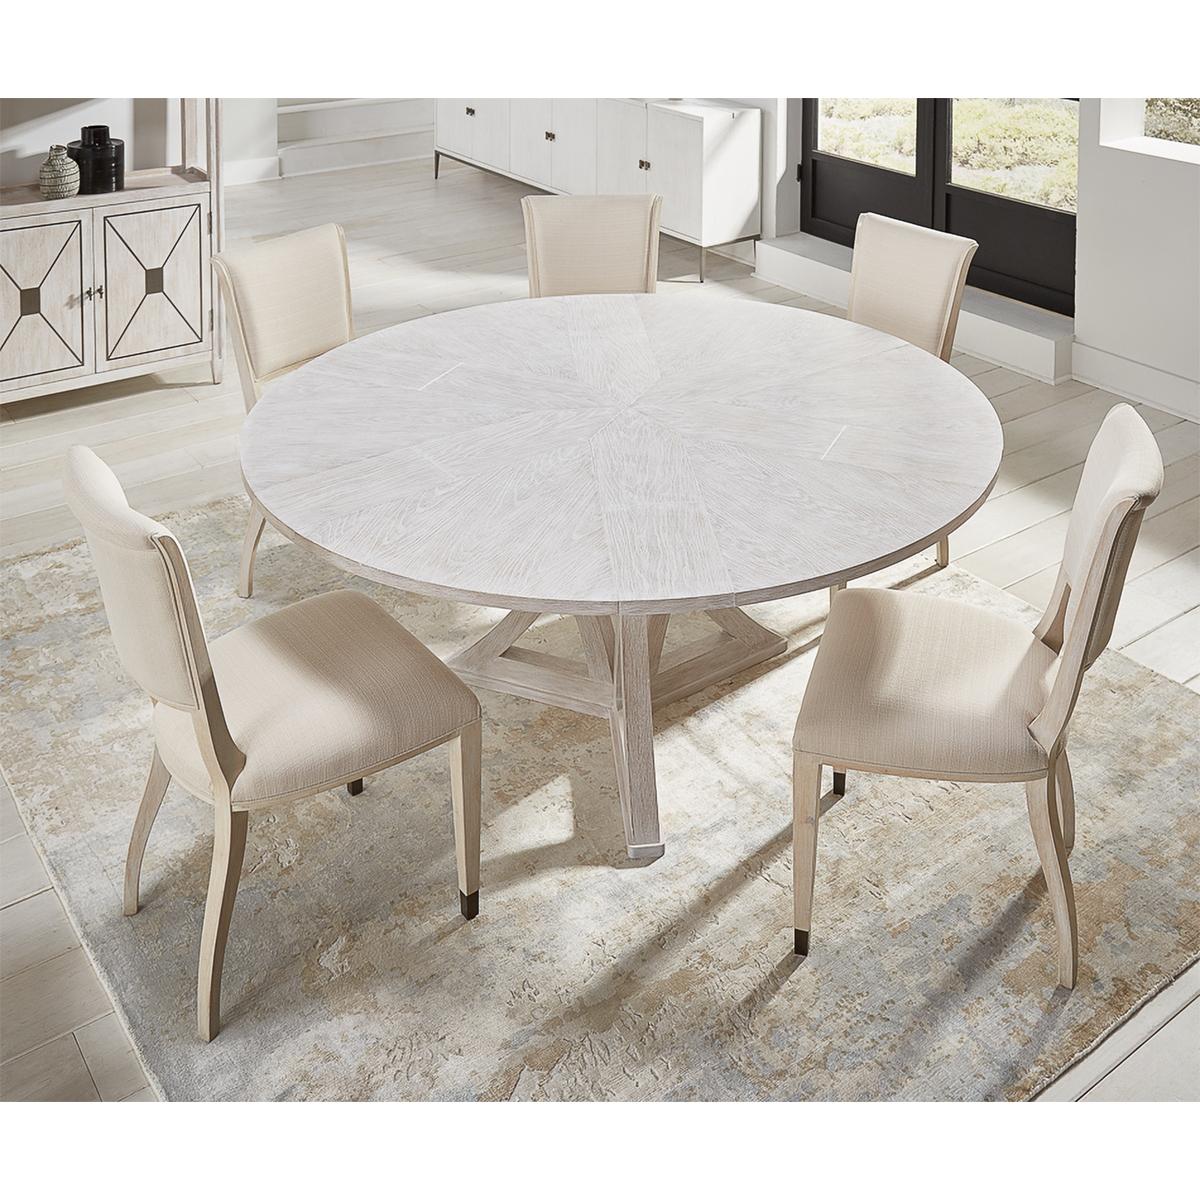 Rustic Round Dining Table - Whitewash White In New Condition For Sale In Westwood, NJ